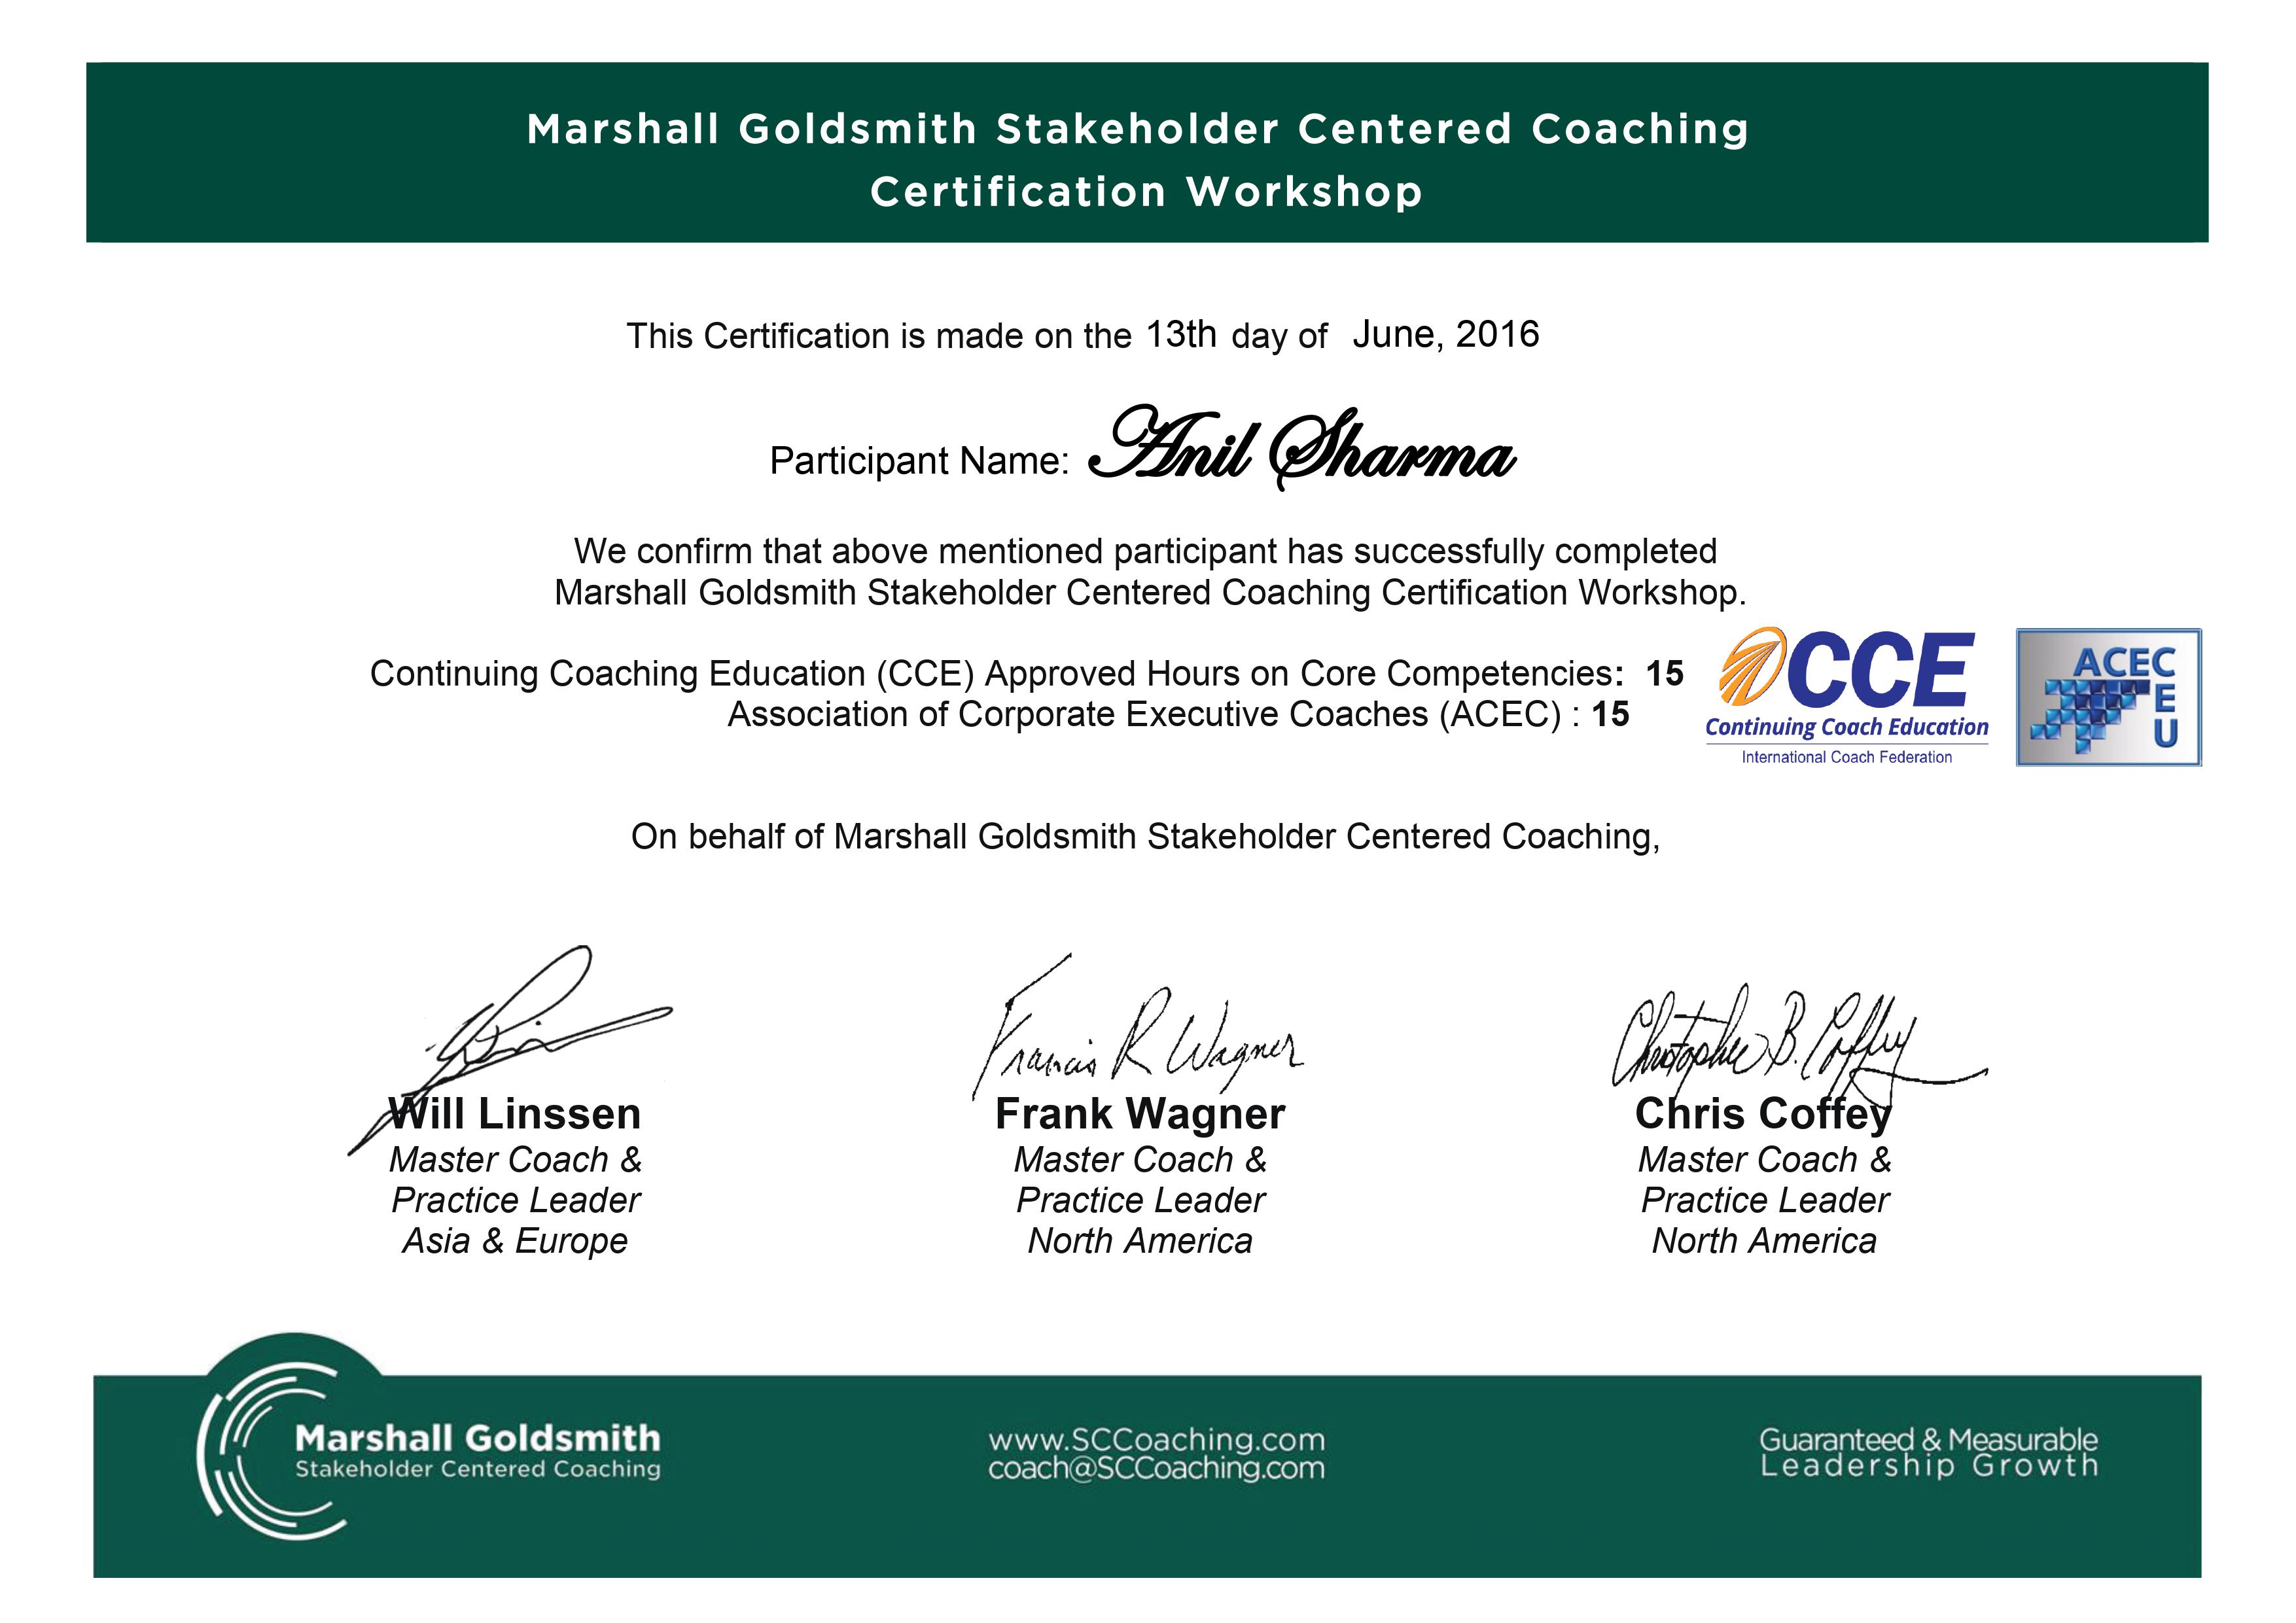 Marshall Goldsmith Stakeholder Centered Coaching Certification Workshop completed successfully by Anil Sharma